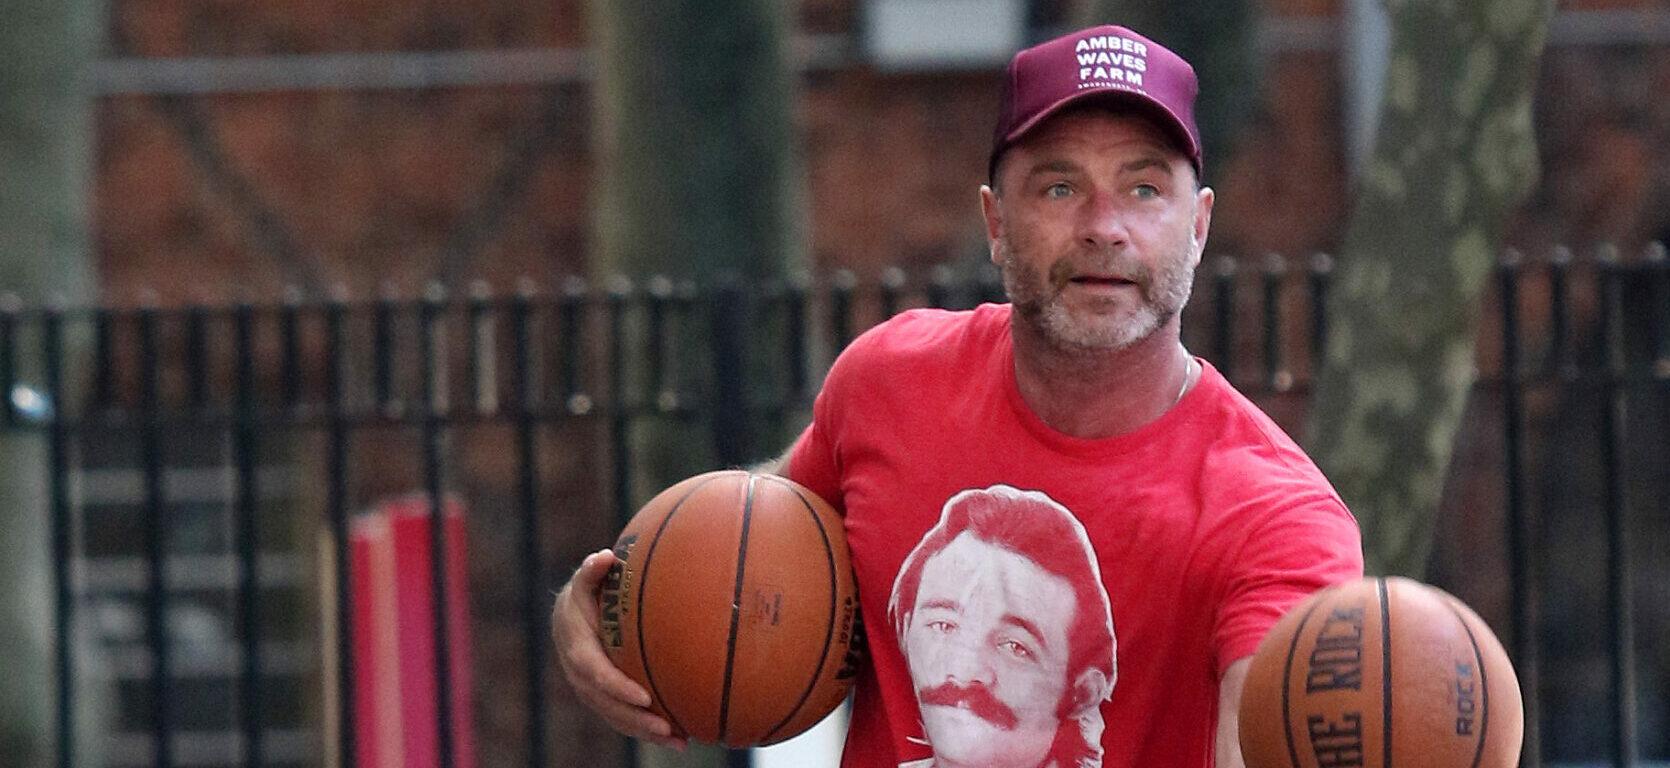 Liev Schreiber wears a Bill Murray shirt while playing basketball in NYC